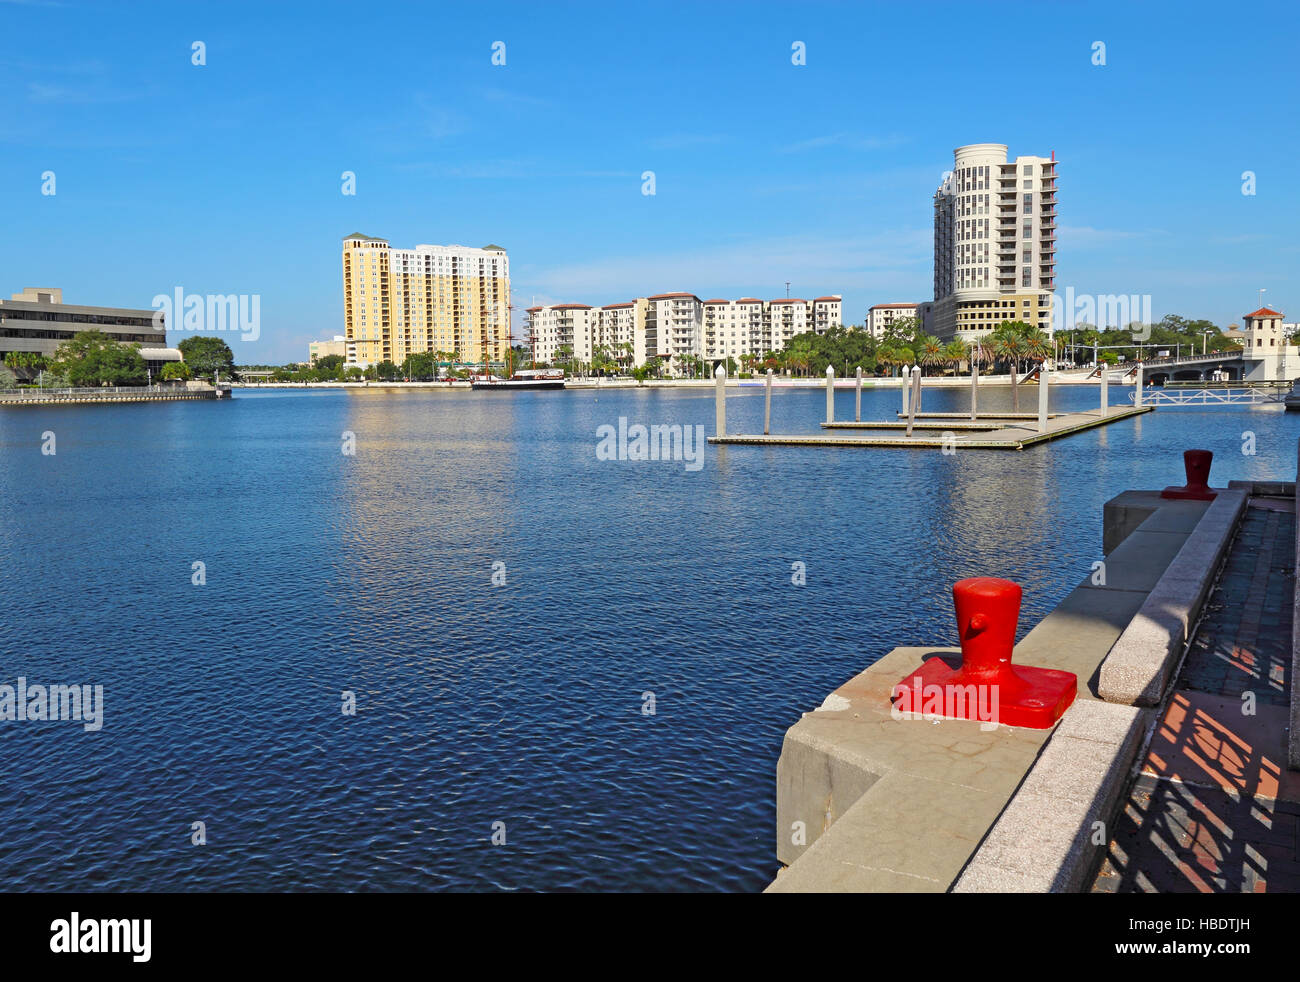 Partial skyline of Tampa, Florida with apartment and condominium buildings at the confluence of Seddon Channel and the Hillsborough River viewed from Stock Photo